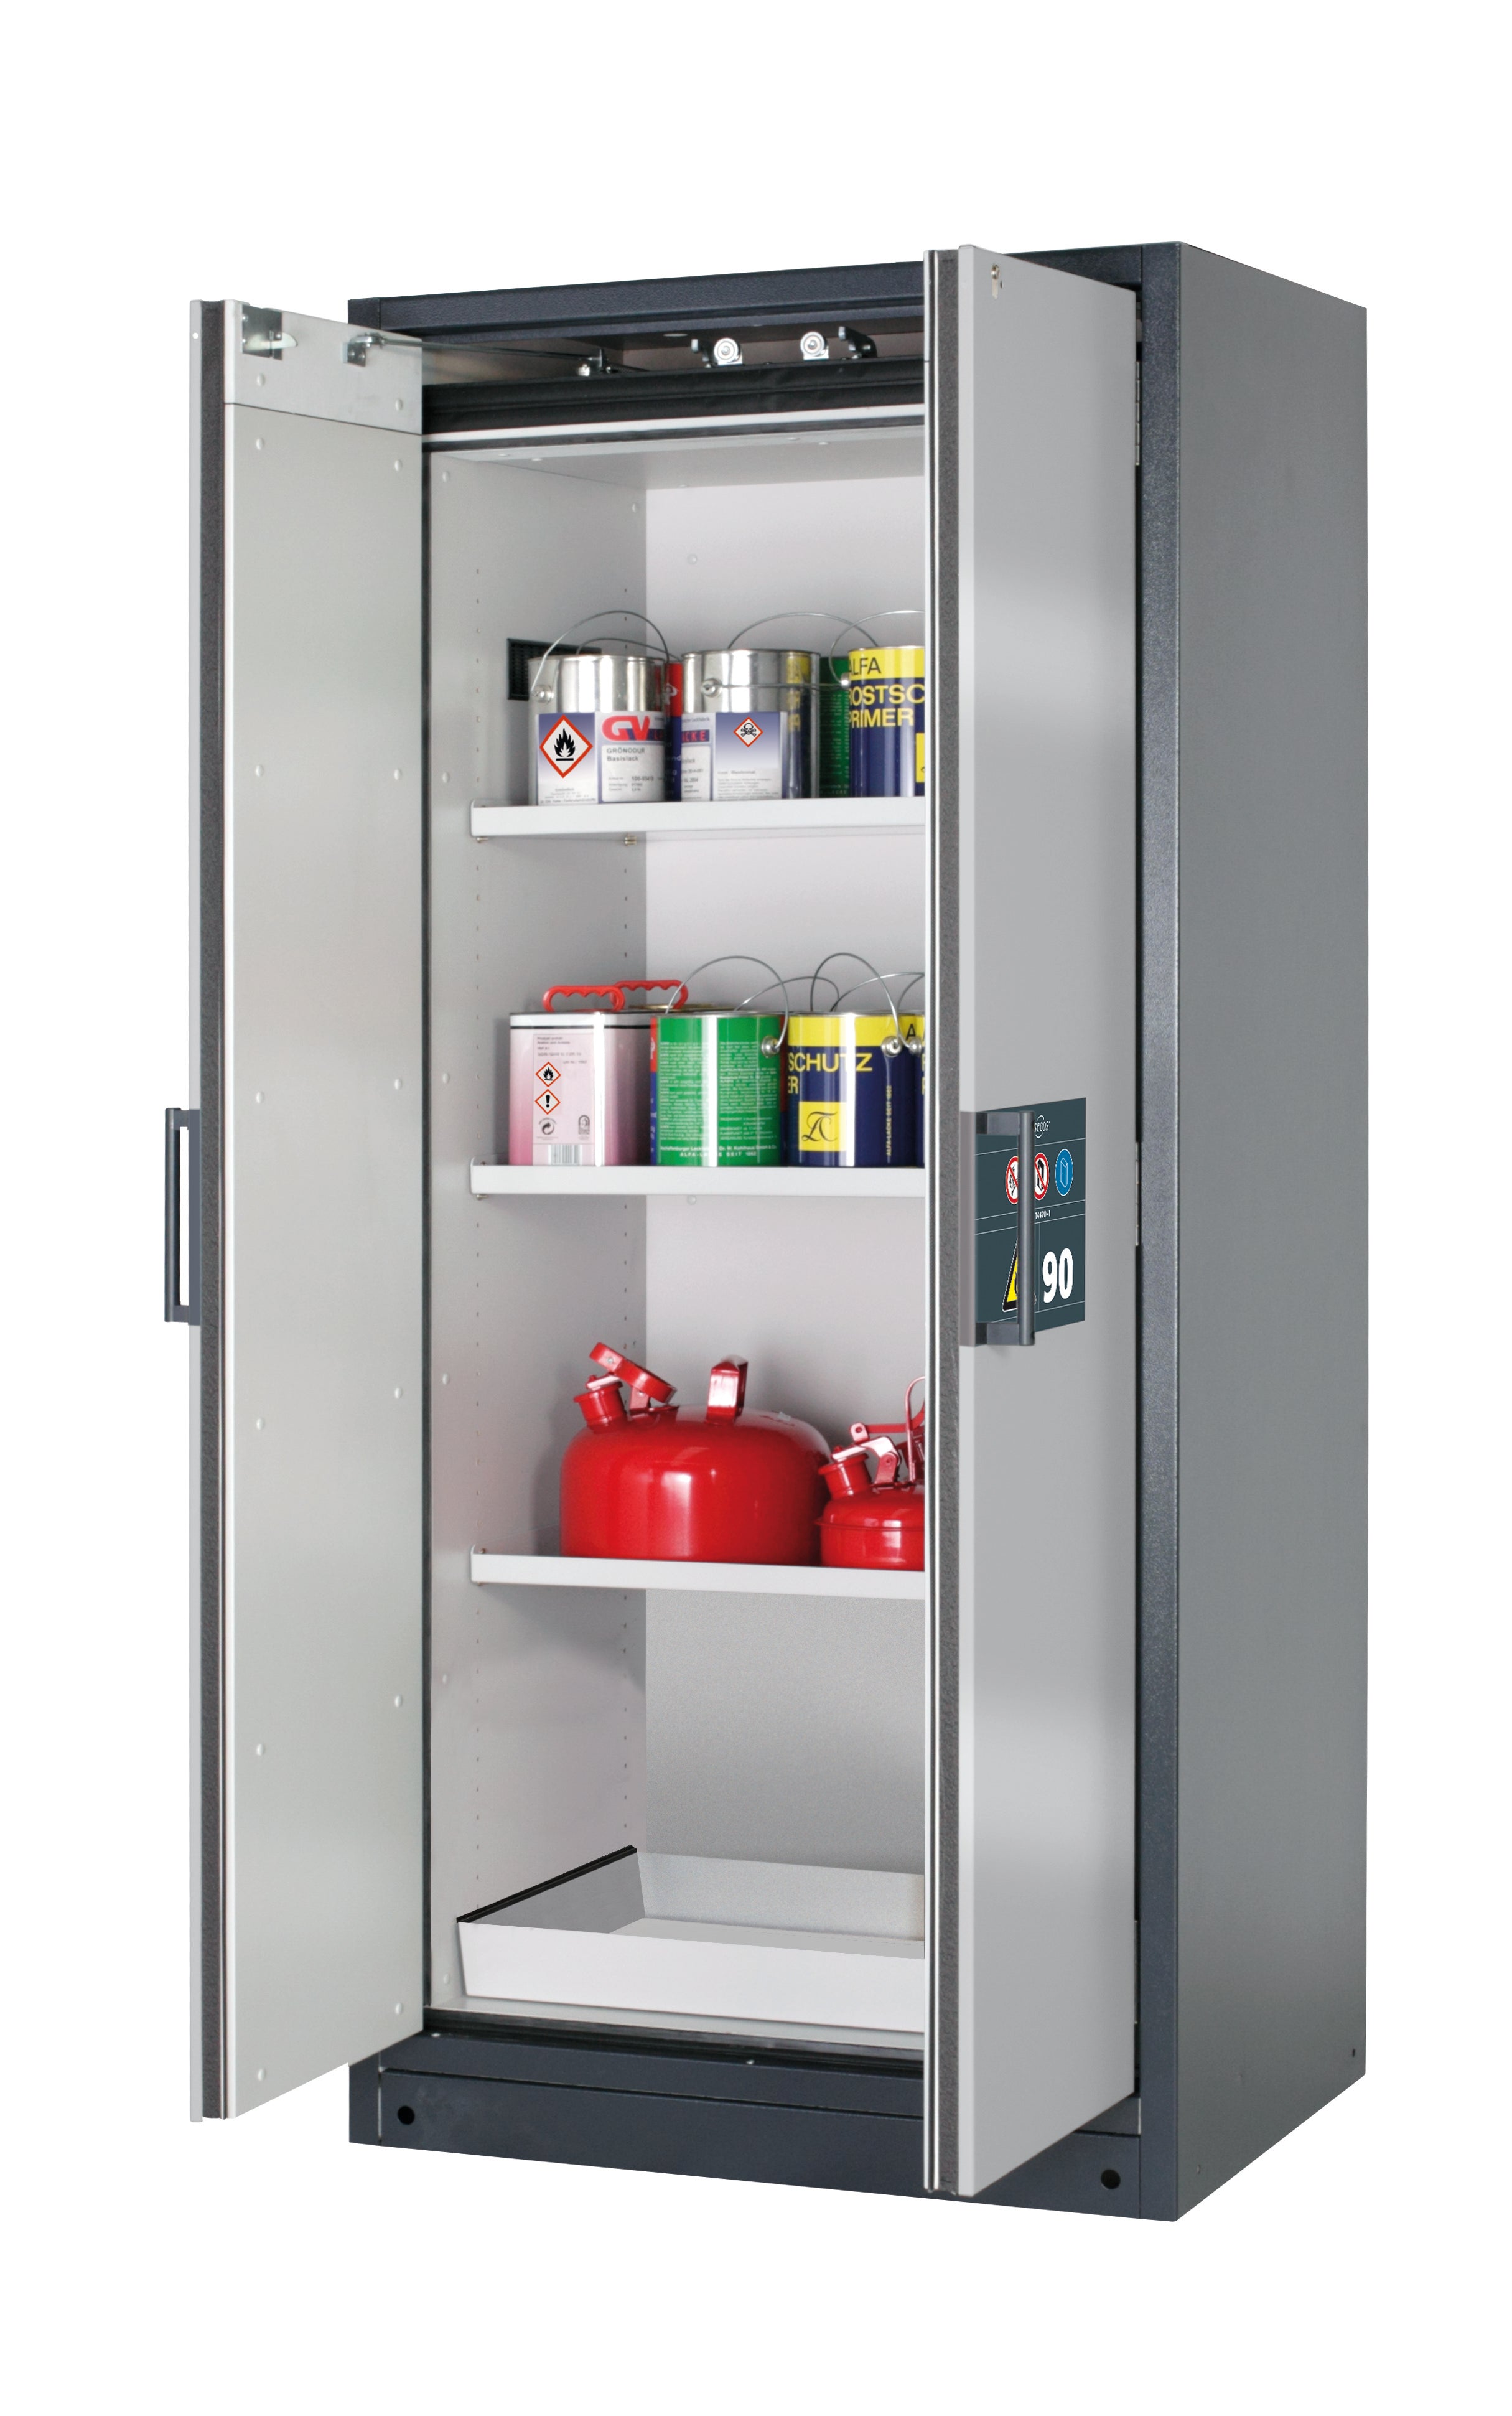 Type 90 safety storage cabinet Q-CLASSIC-90 model Q90.195.090 in asecos silver with 3x shelf standard (sheet steel),